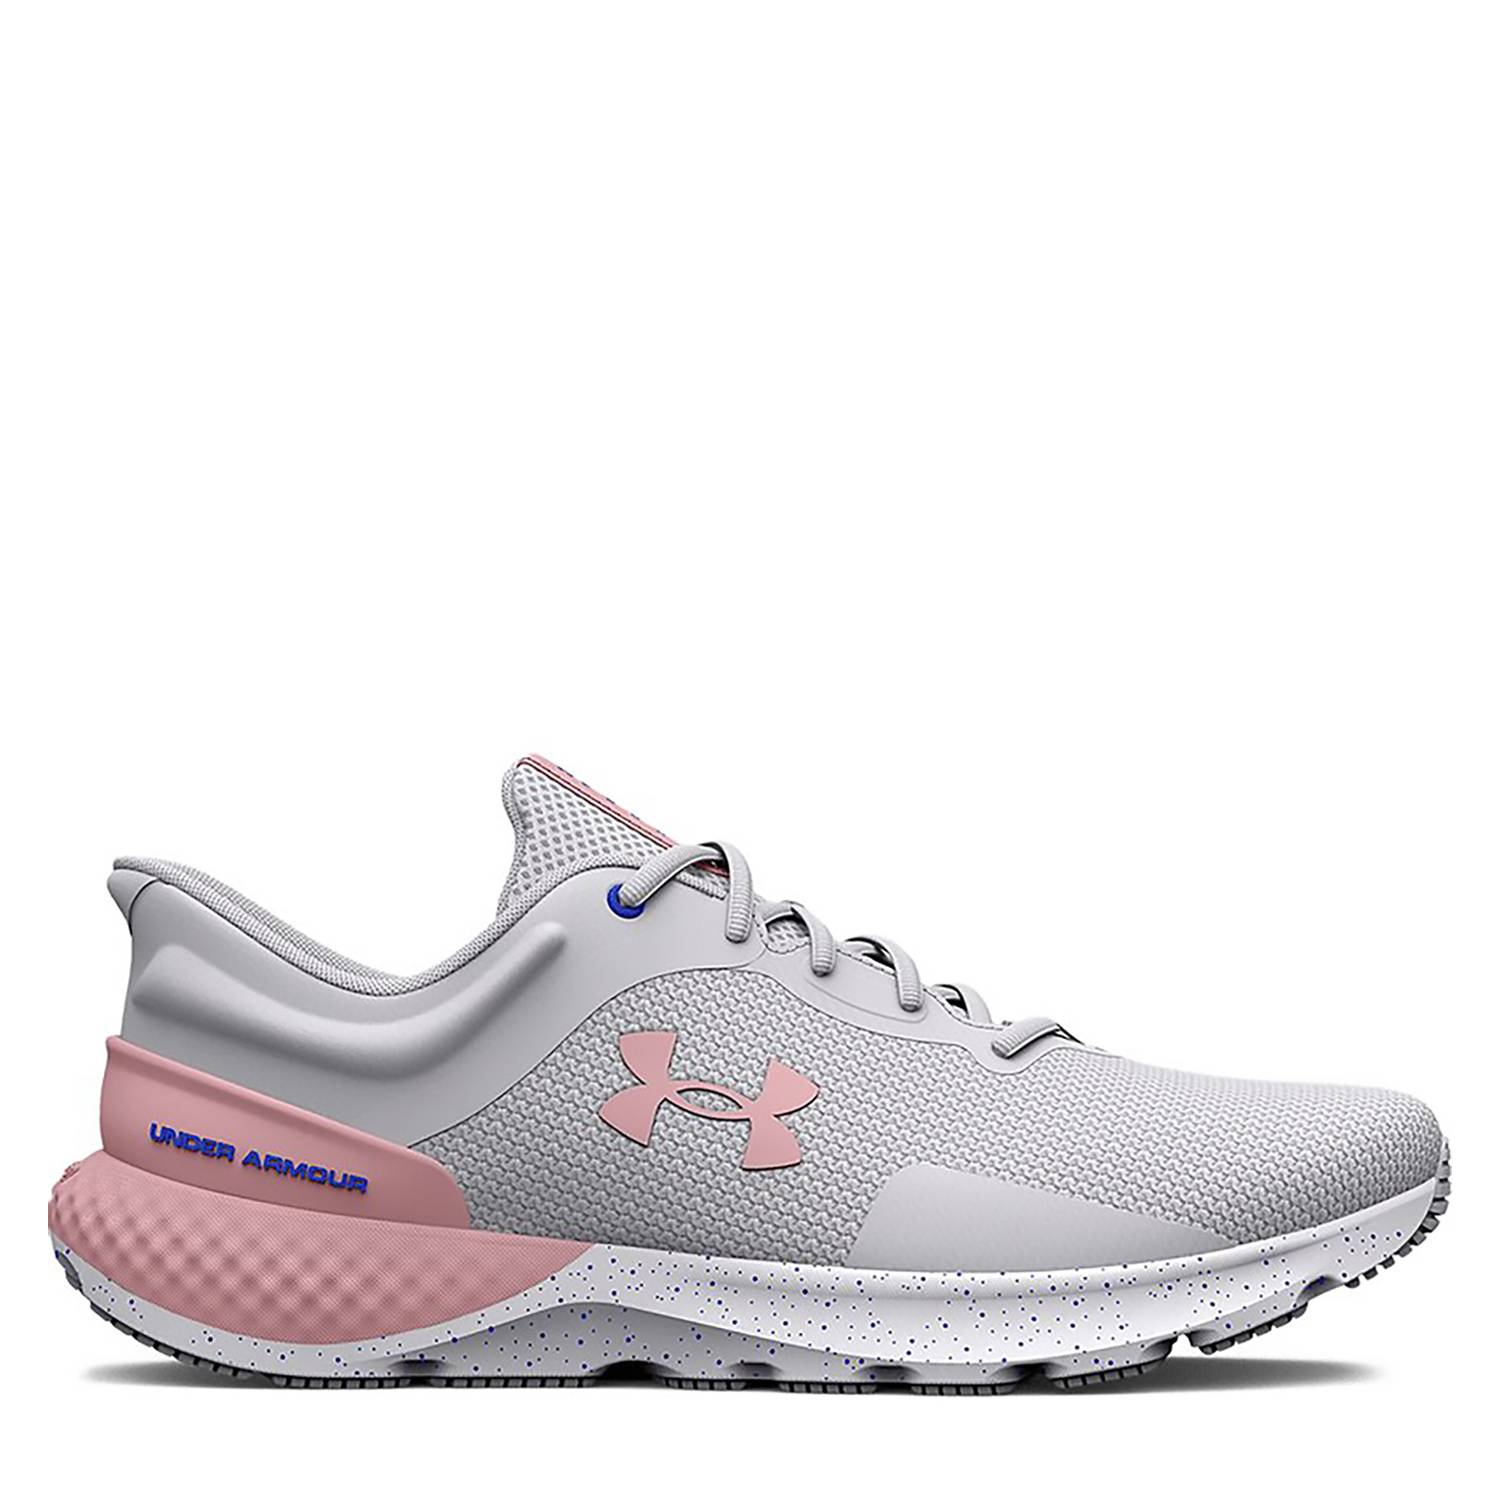 Zapatillas Cross training Mujer Charge Esc Blanco Under Armour UNDER ARMOUR